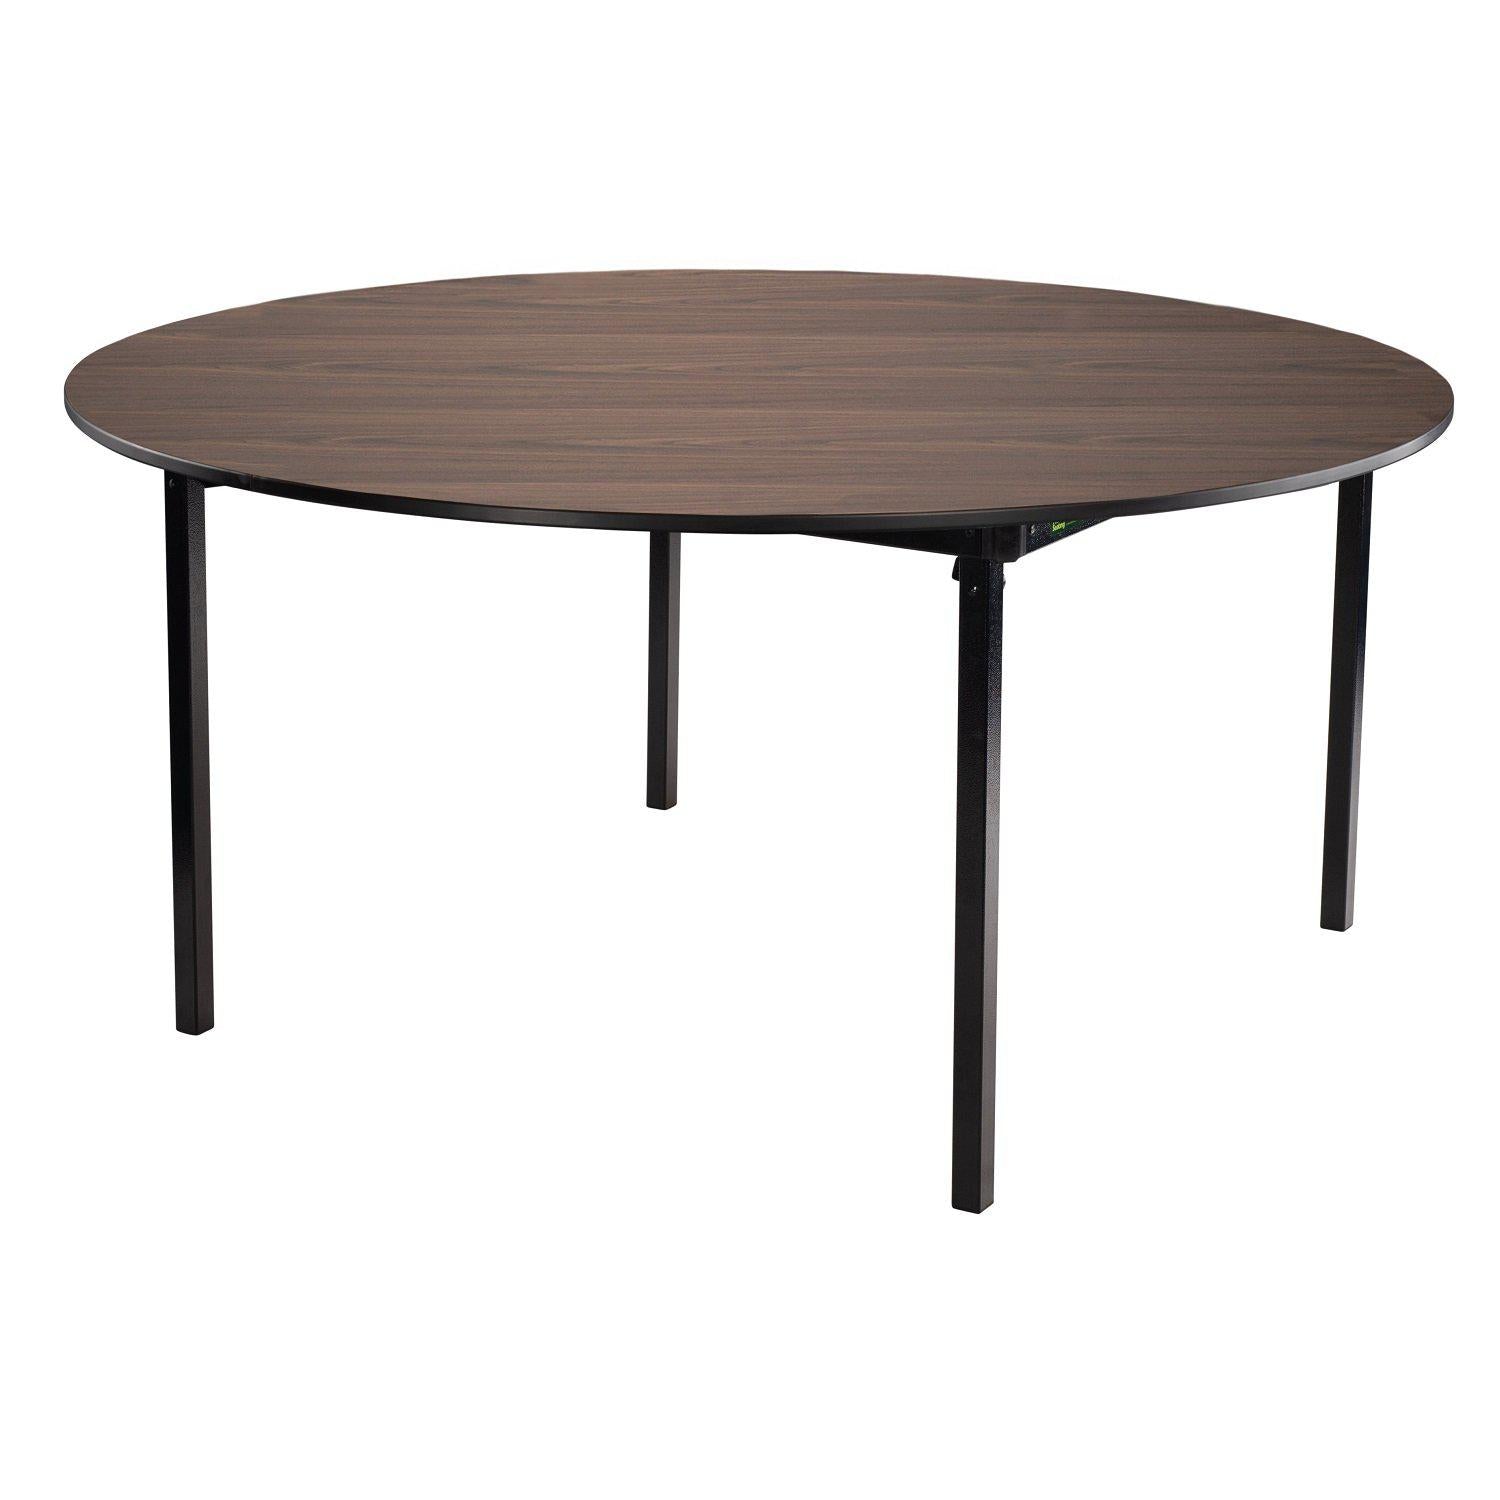 Max Seating Folding Table, 60" Round, Premium Plywood Core, High Pressure Laminate Top with PVC Edge Banding